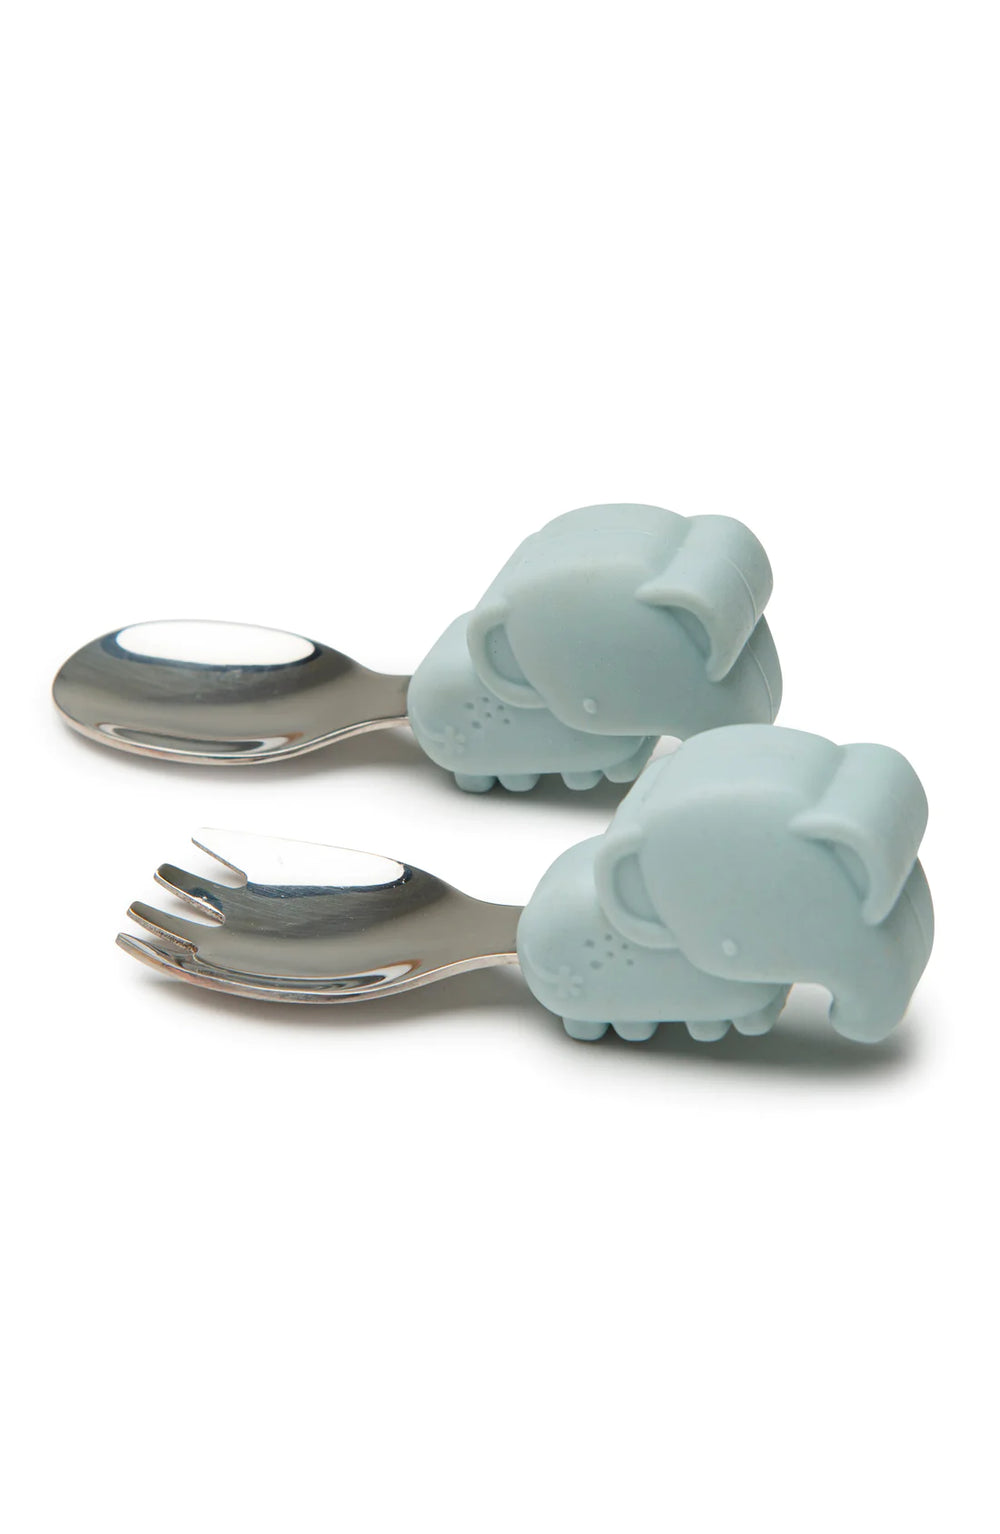 Elephant Learning Spoon and Fork Set by Loulou Lollipop